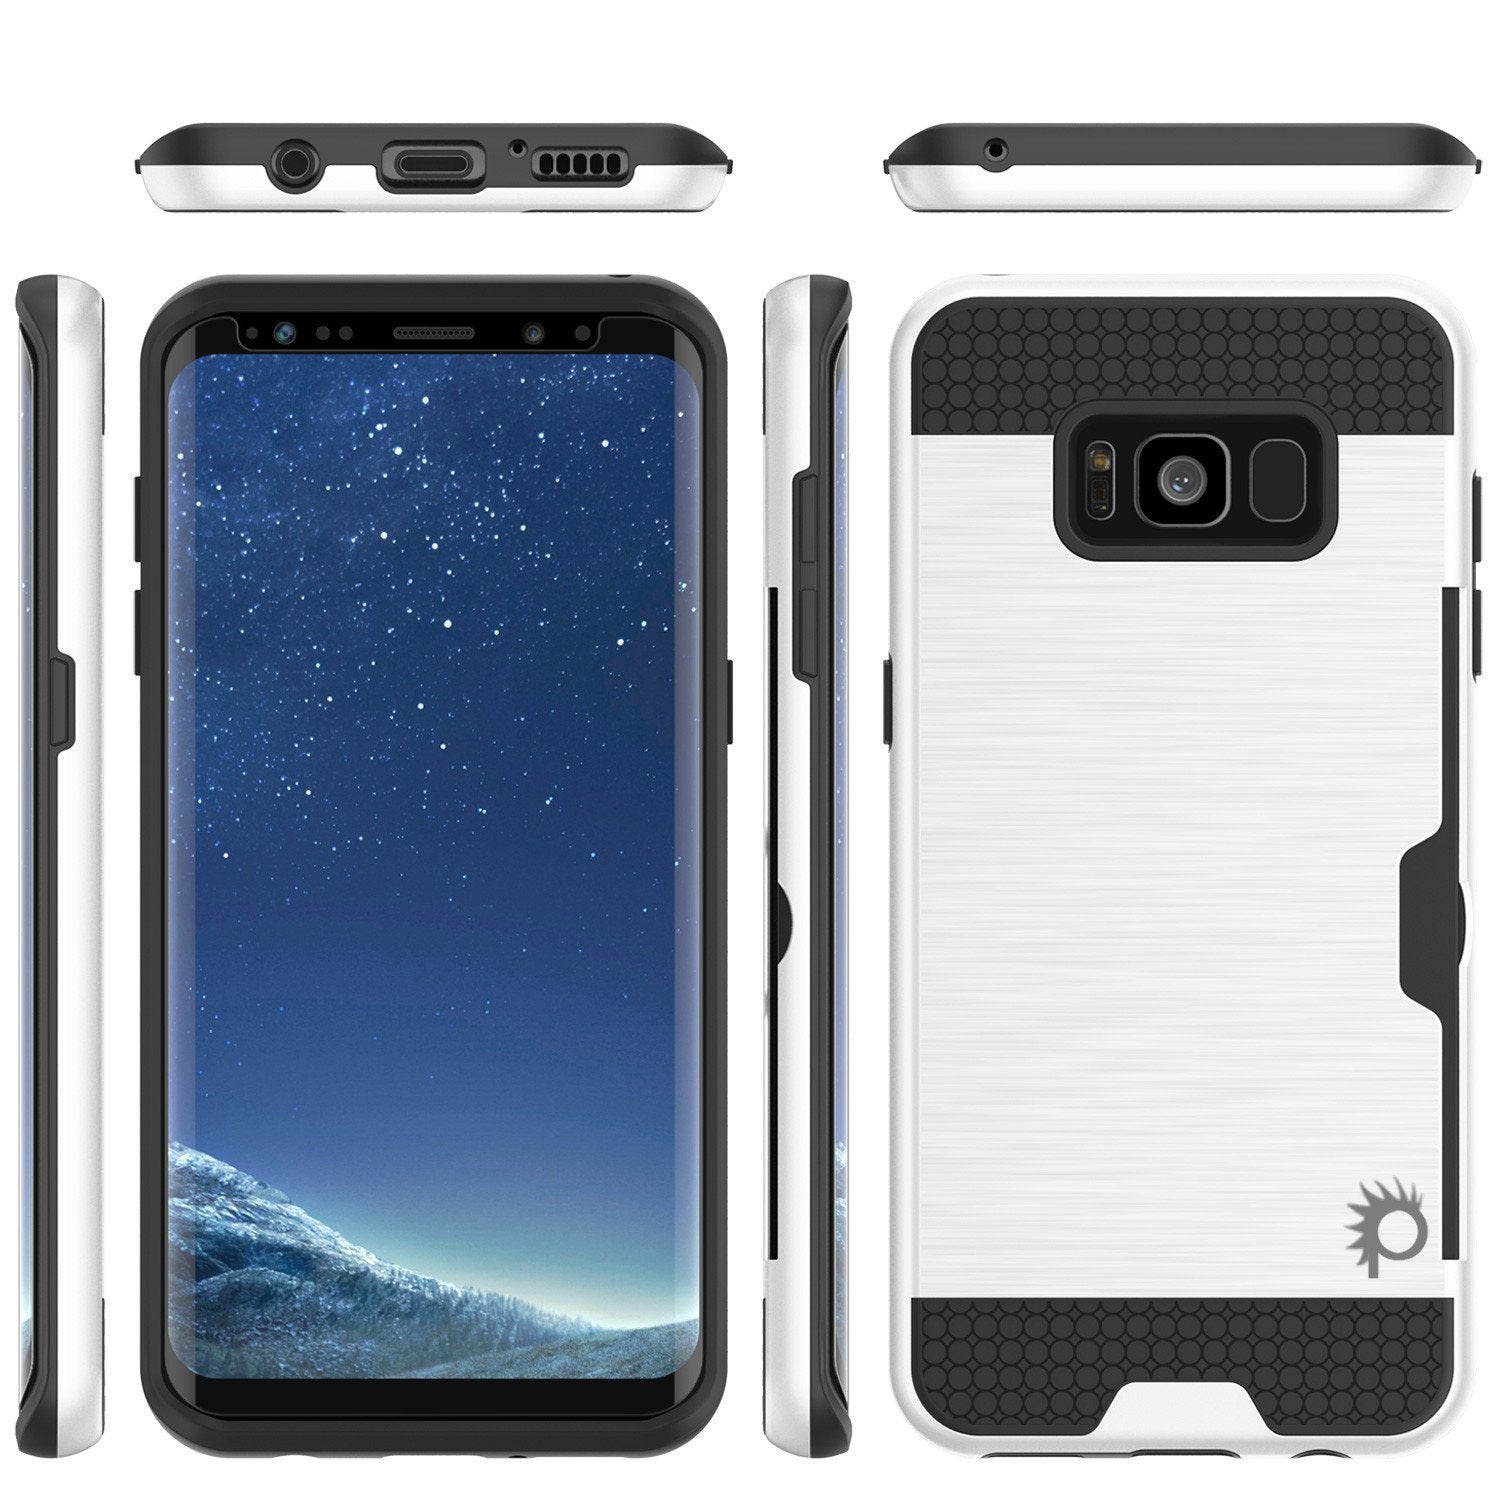 Galaxy S8 Plus Case, PUNKcase [SLOT Series] [Slim Fit] Dual-Layer Armor Cover w/Integrated Anti-Shock System, Credit Card Slot & PunkShield Screen Protector for Samsung Galaxy S8+ [White] - PunkCase NZ